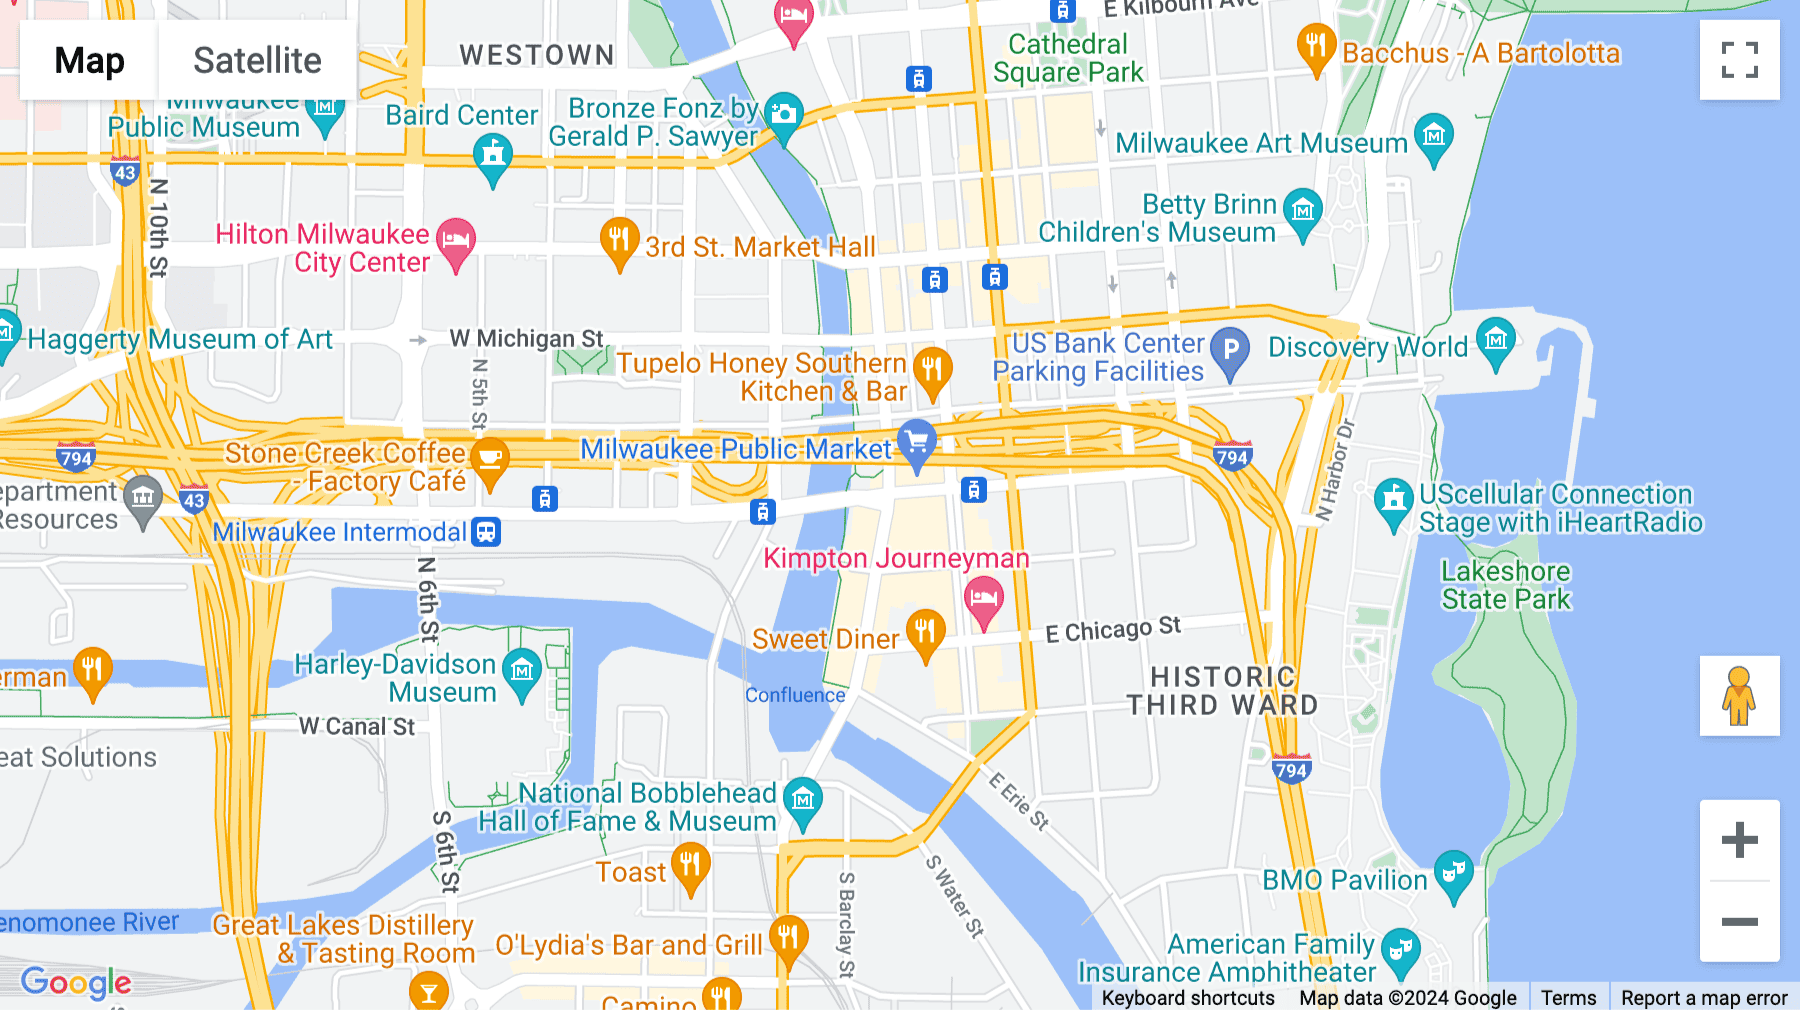 Click for interative map of 342 N. Water Street, Suite 600, Milwaukee, Wisconsin, Milwaukee